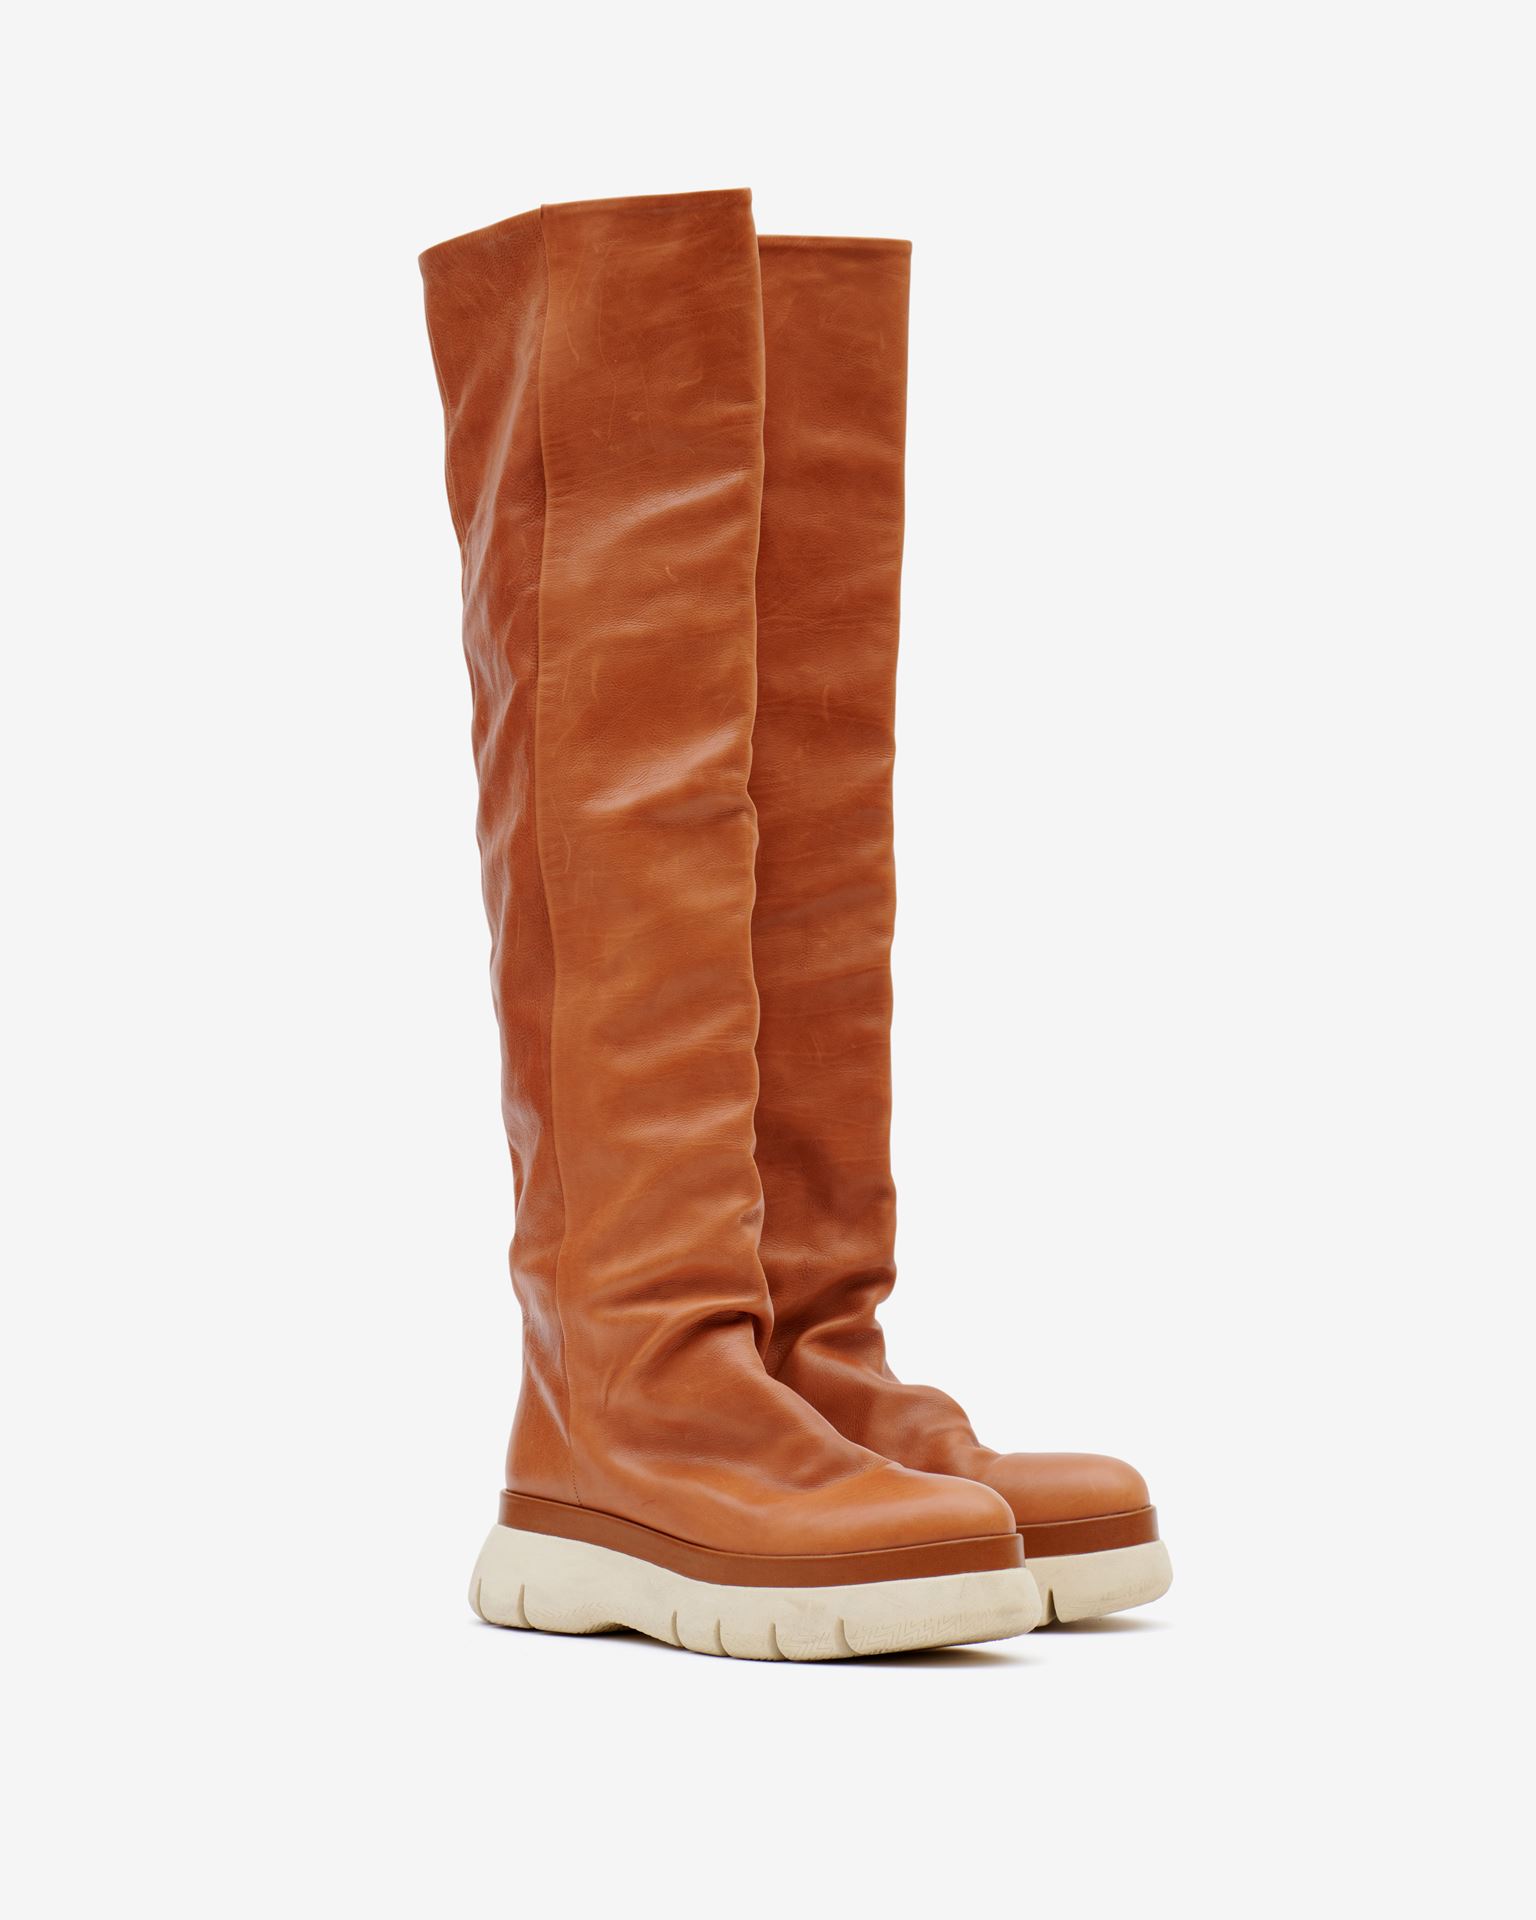 Isabel Marant, Malyx Leather High Boots - Women - Brown